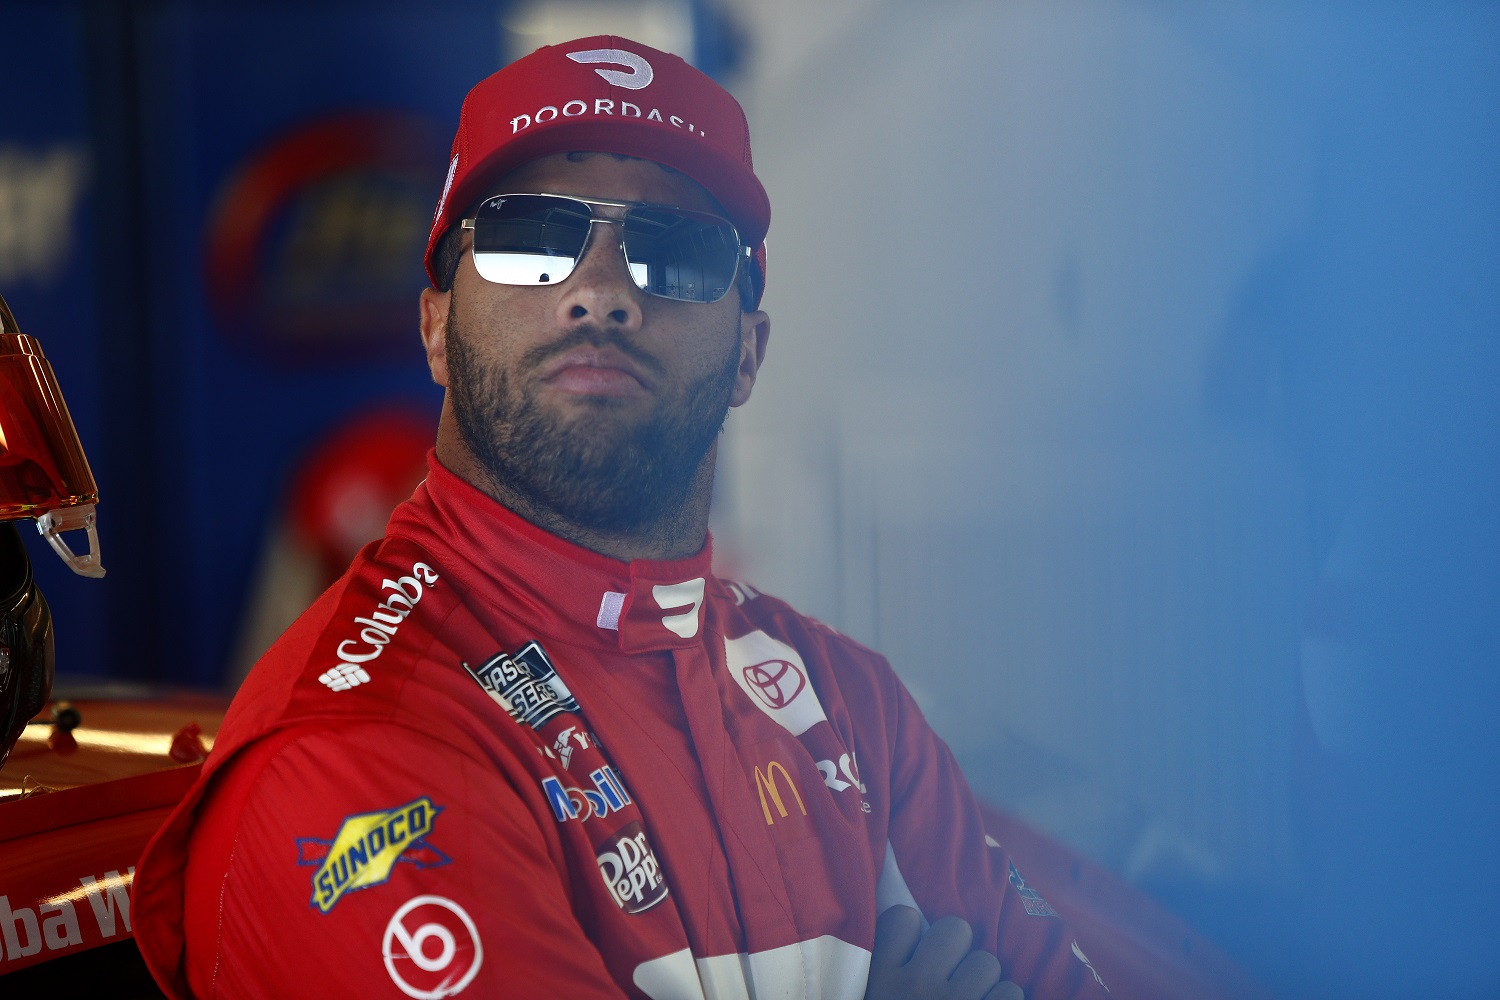 Bubba Wallace waits in the garage area during practice for the NASCAR Cup Series Championship at Phoenix Raceway on Nov. 5, 2021 in Avondale, Arizona. | Sean Gardner/23XI Racing via Getty Images